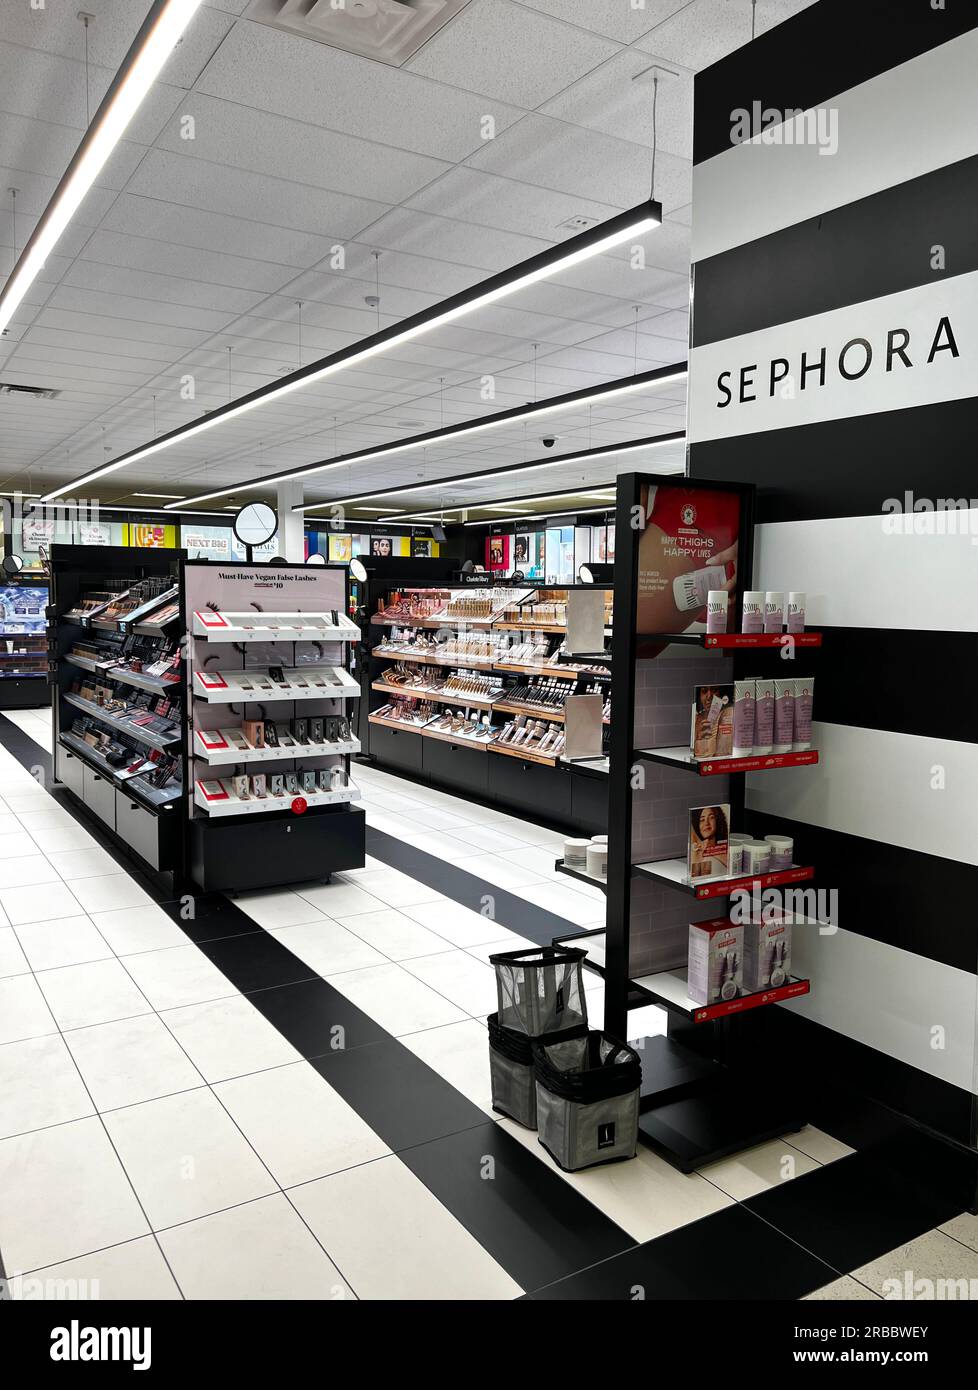 Sephora shop inside a Kohl's department store. The partnership replaced Kohl's own beauty section. Stock Photo